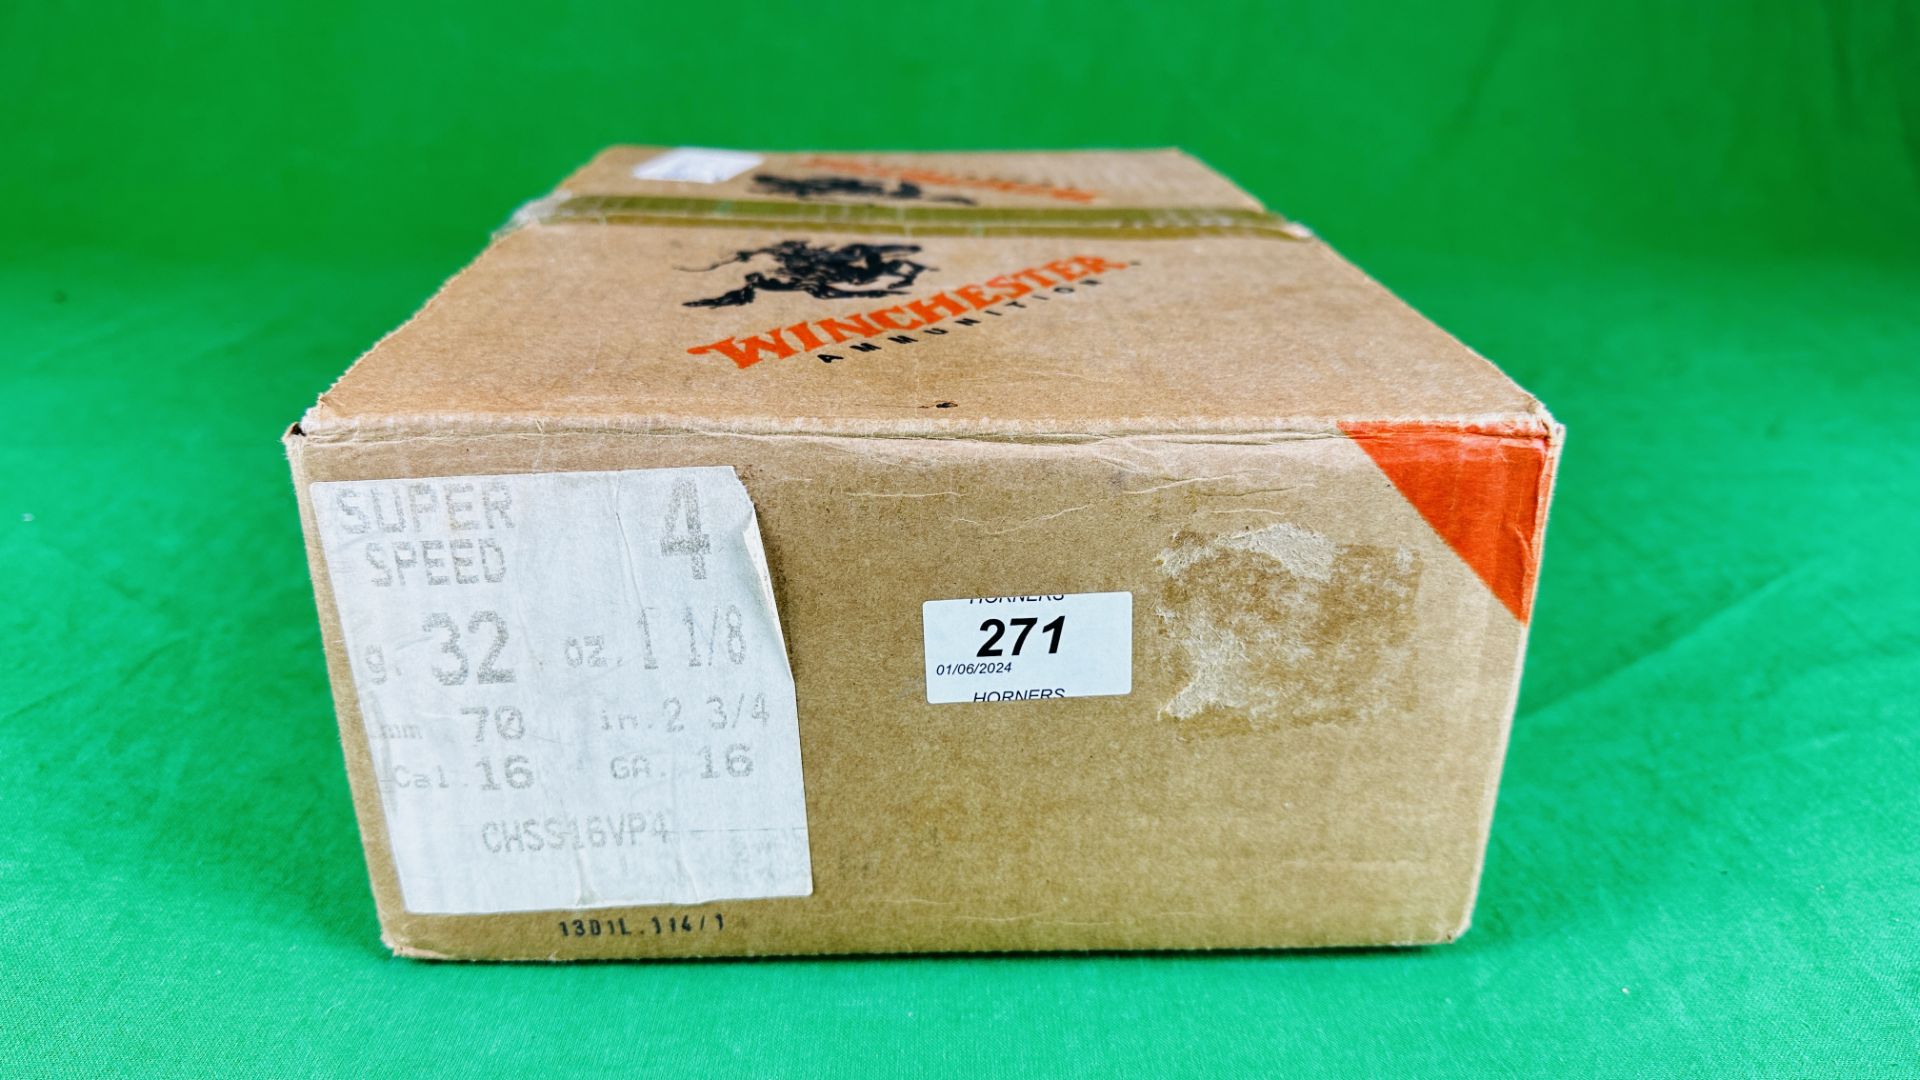 250 WINCHESTER SUPER SPEED 16 GAUGE 2¾" 4 SHOT 32 GRM LOAD CARTRIDGES - (TO BE COLLECTED IN PERSON